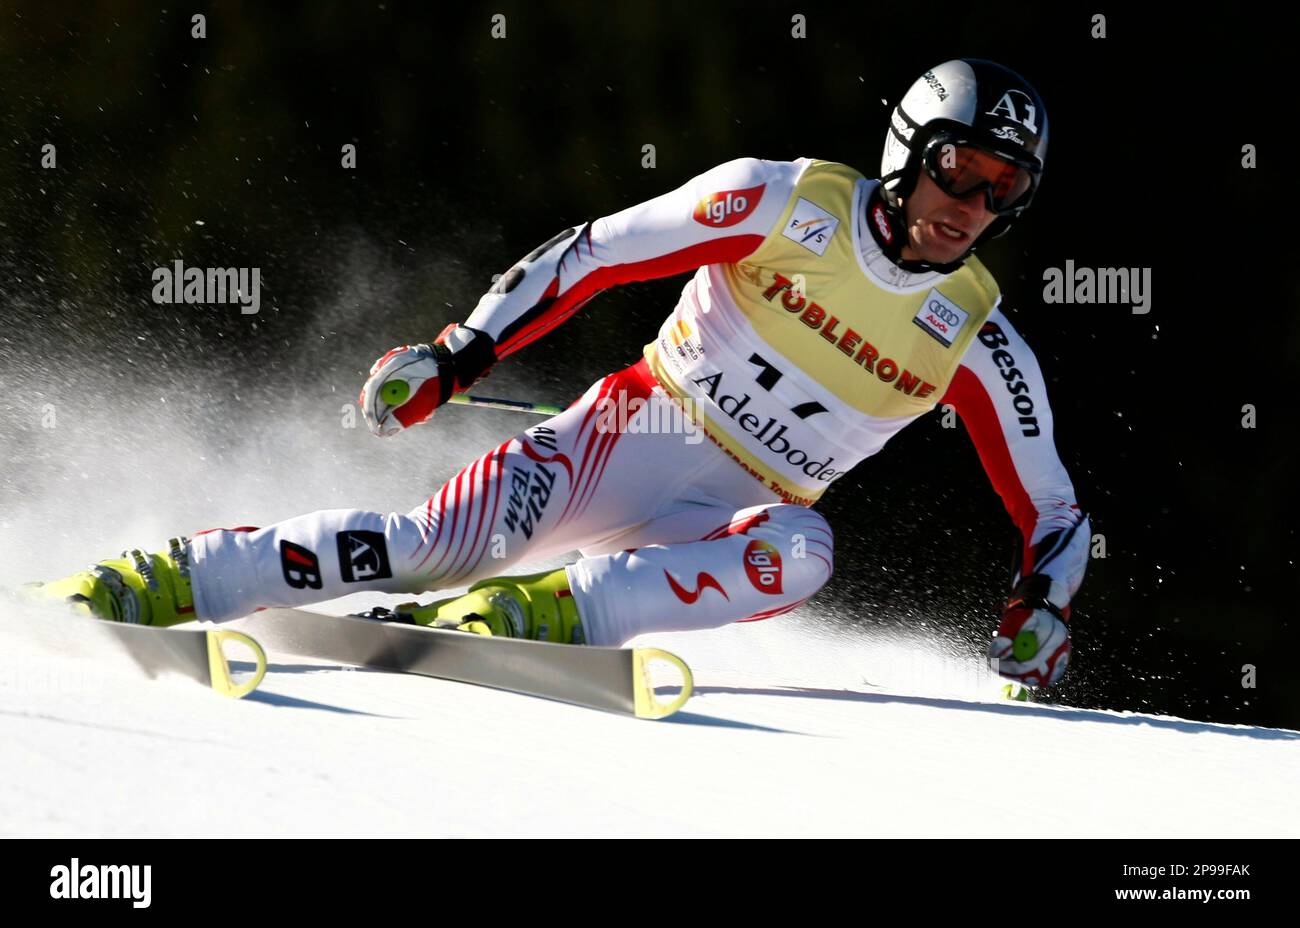 Austrias Christoph Gruber speeds down the course on his way to clock the third fastest time during the first run of an alpine ski, Mens World Cup giant slalom race, in Adelboden,